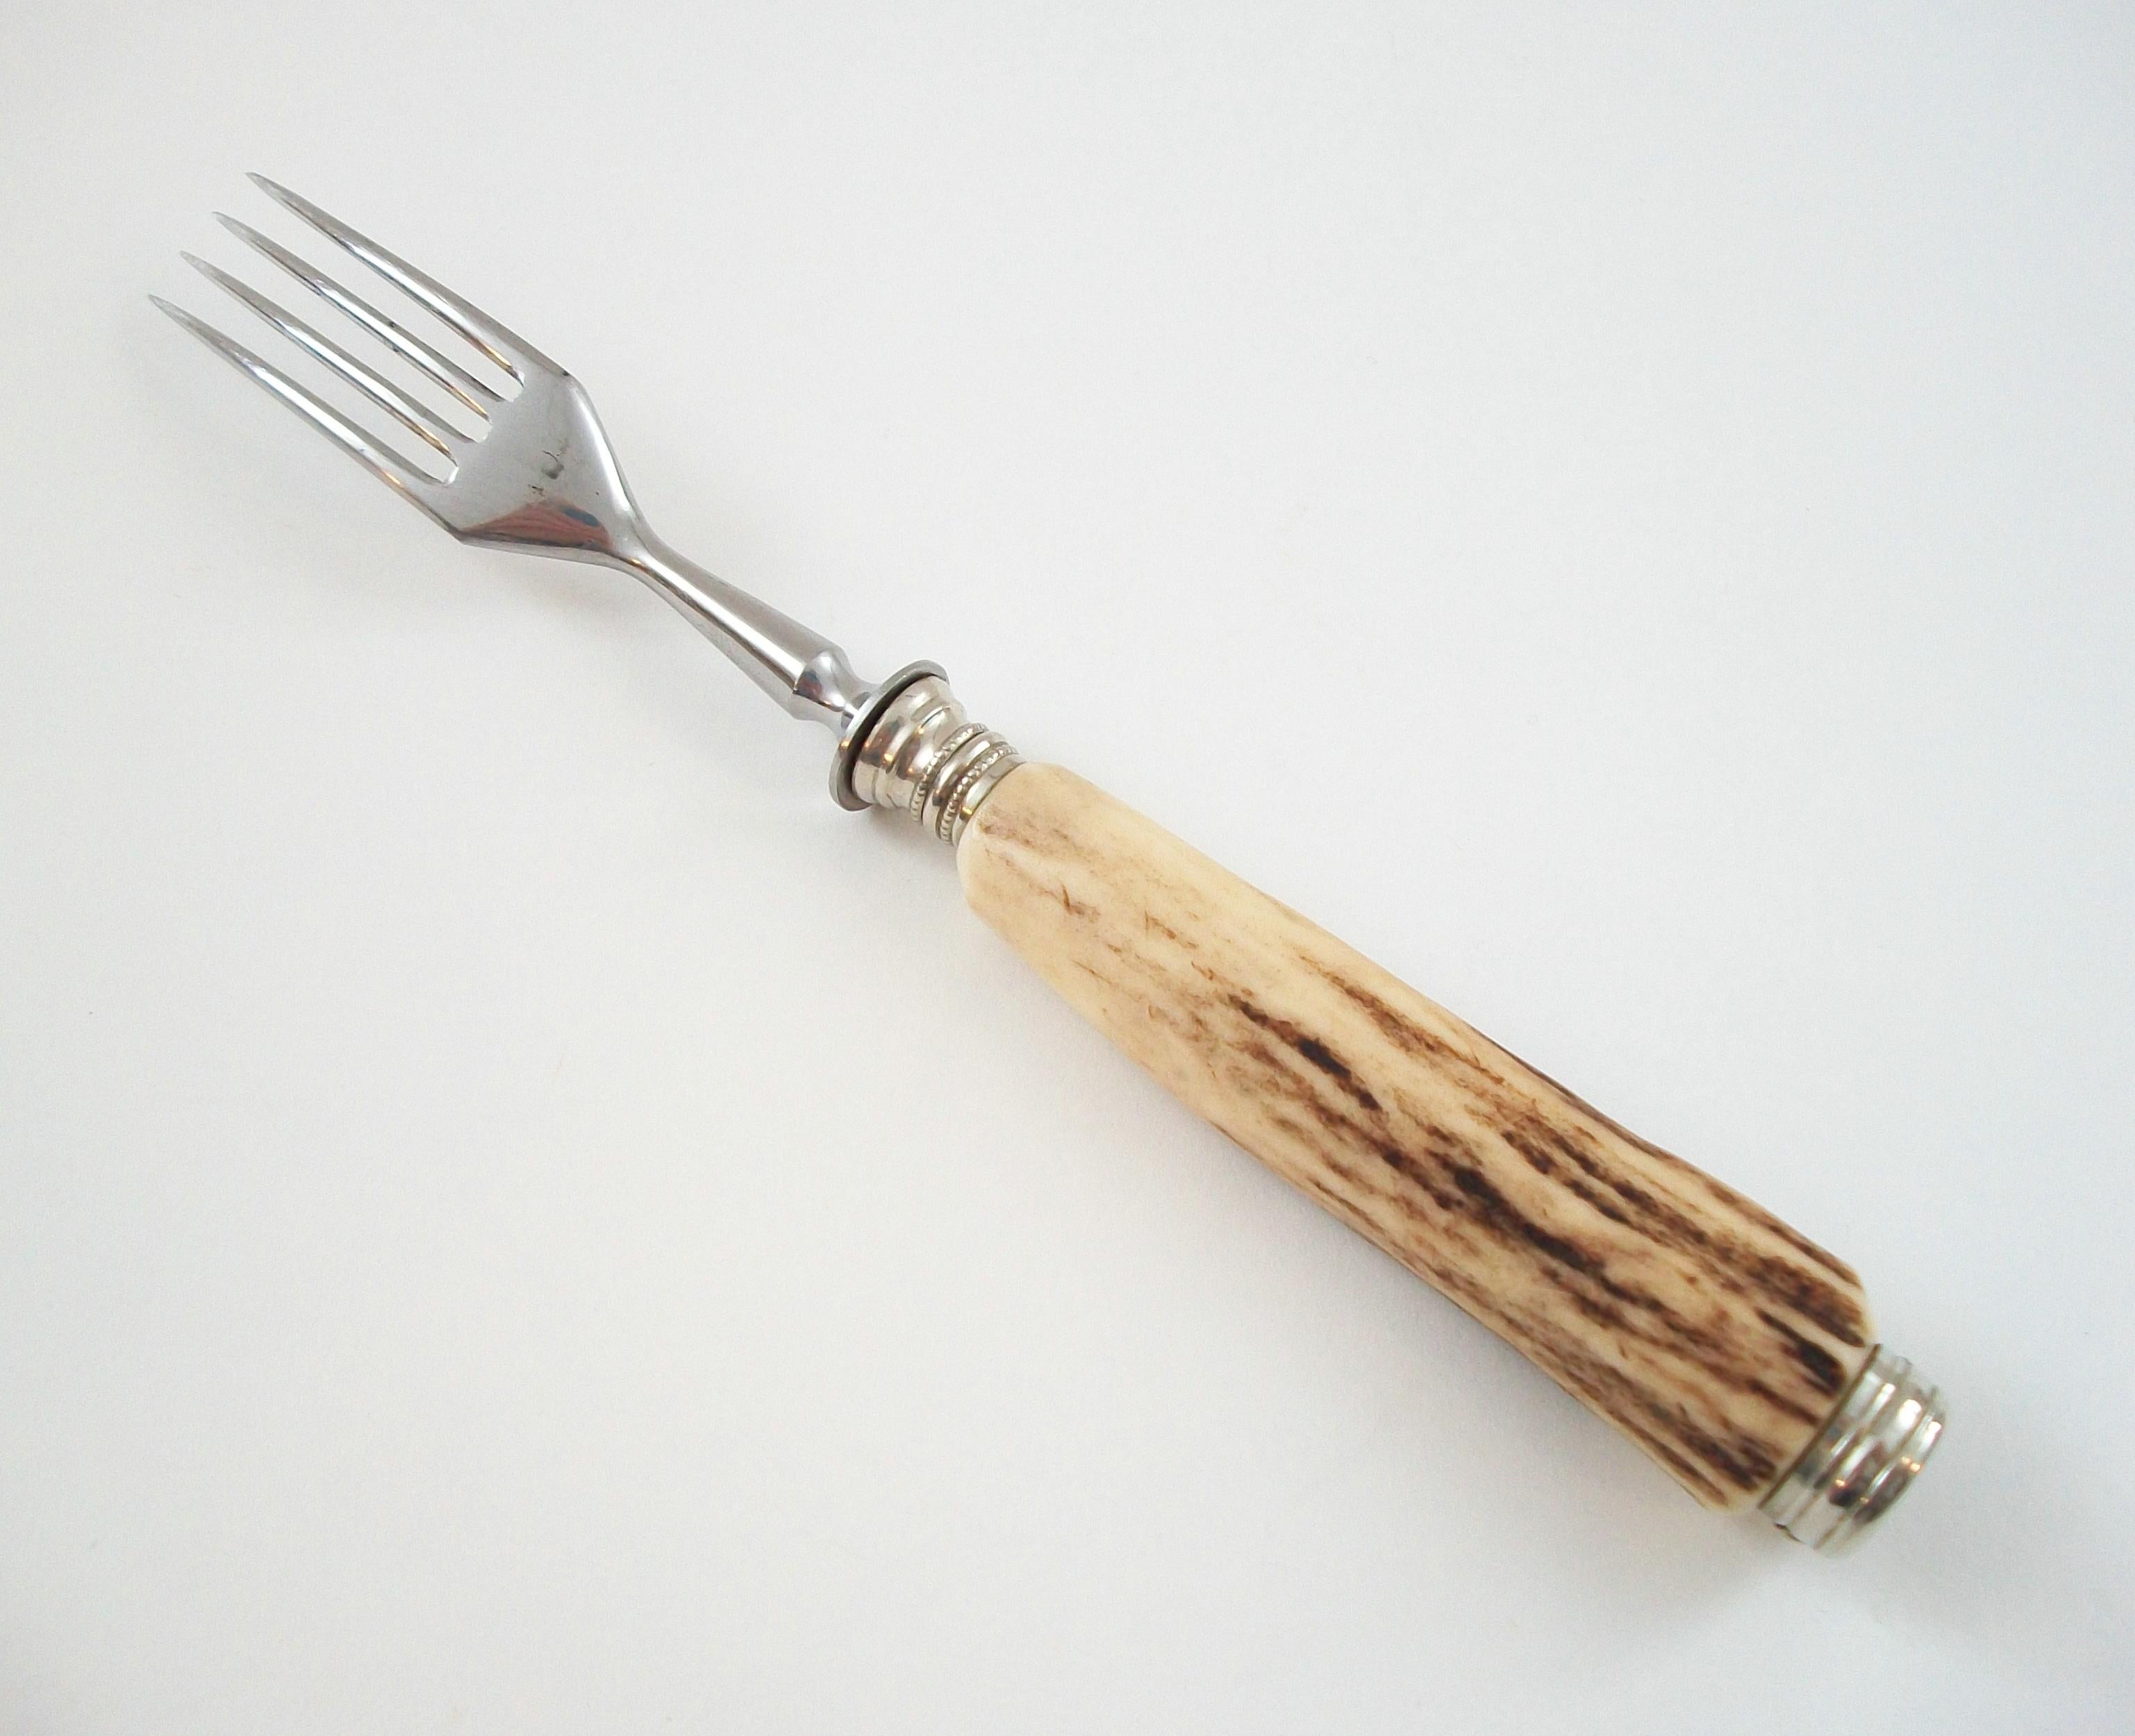 Rustic SOLINGEN - Antler Handled Stainless Steel Fork - Germany - Circa 1950's For Sale